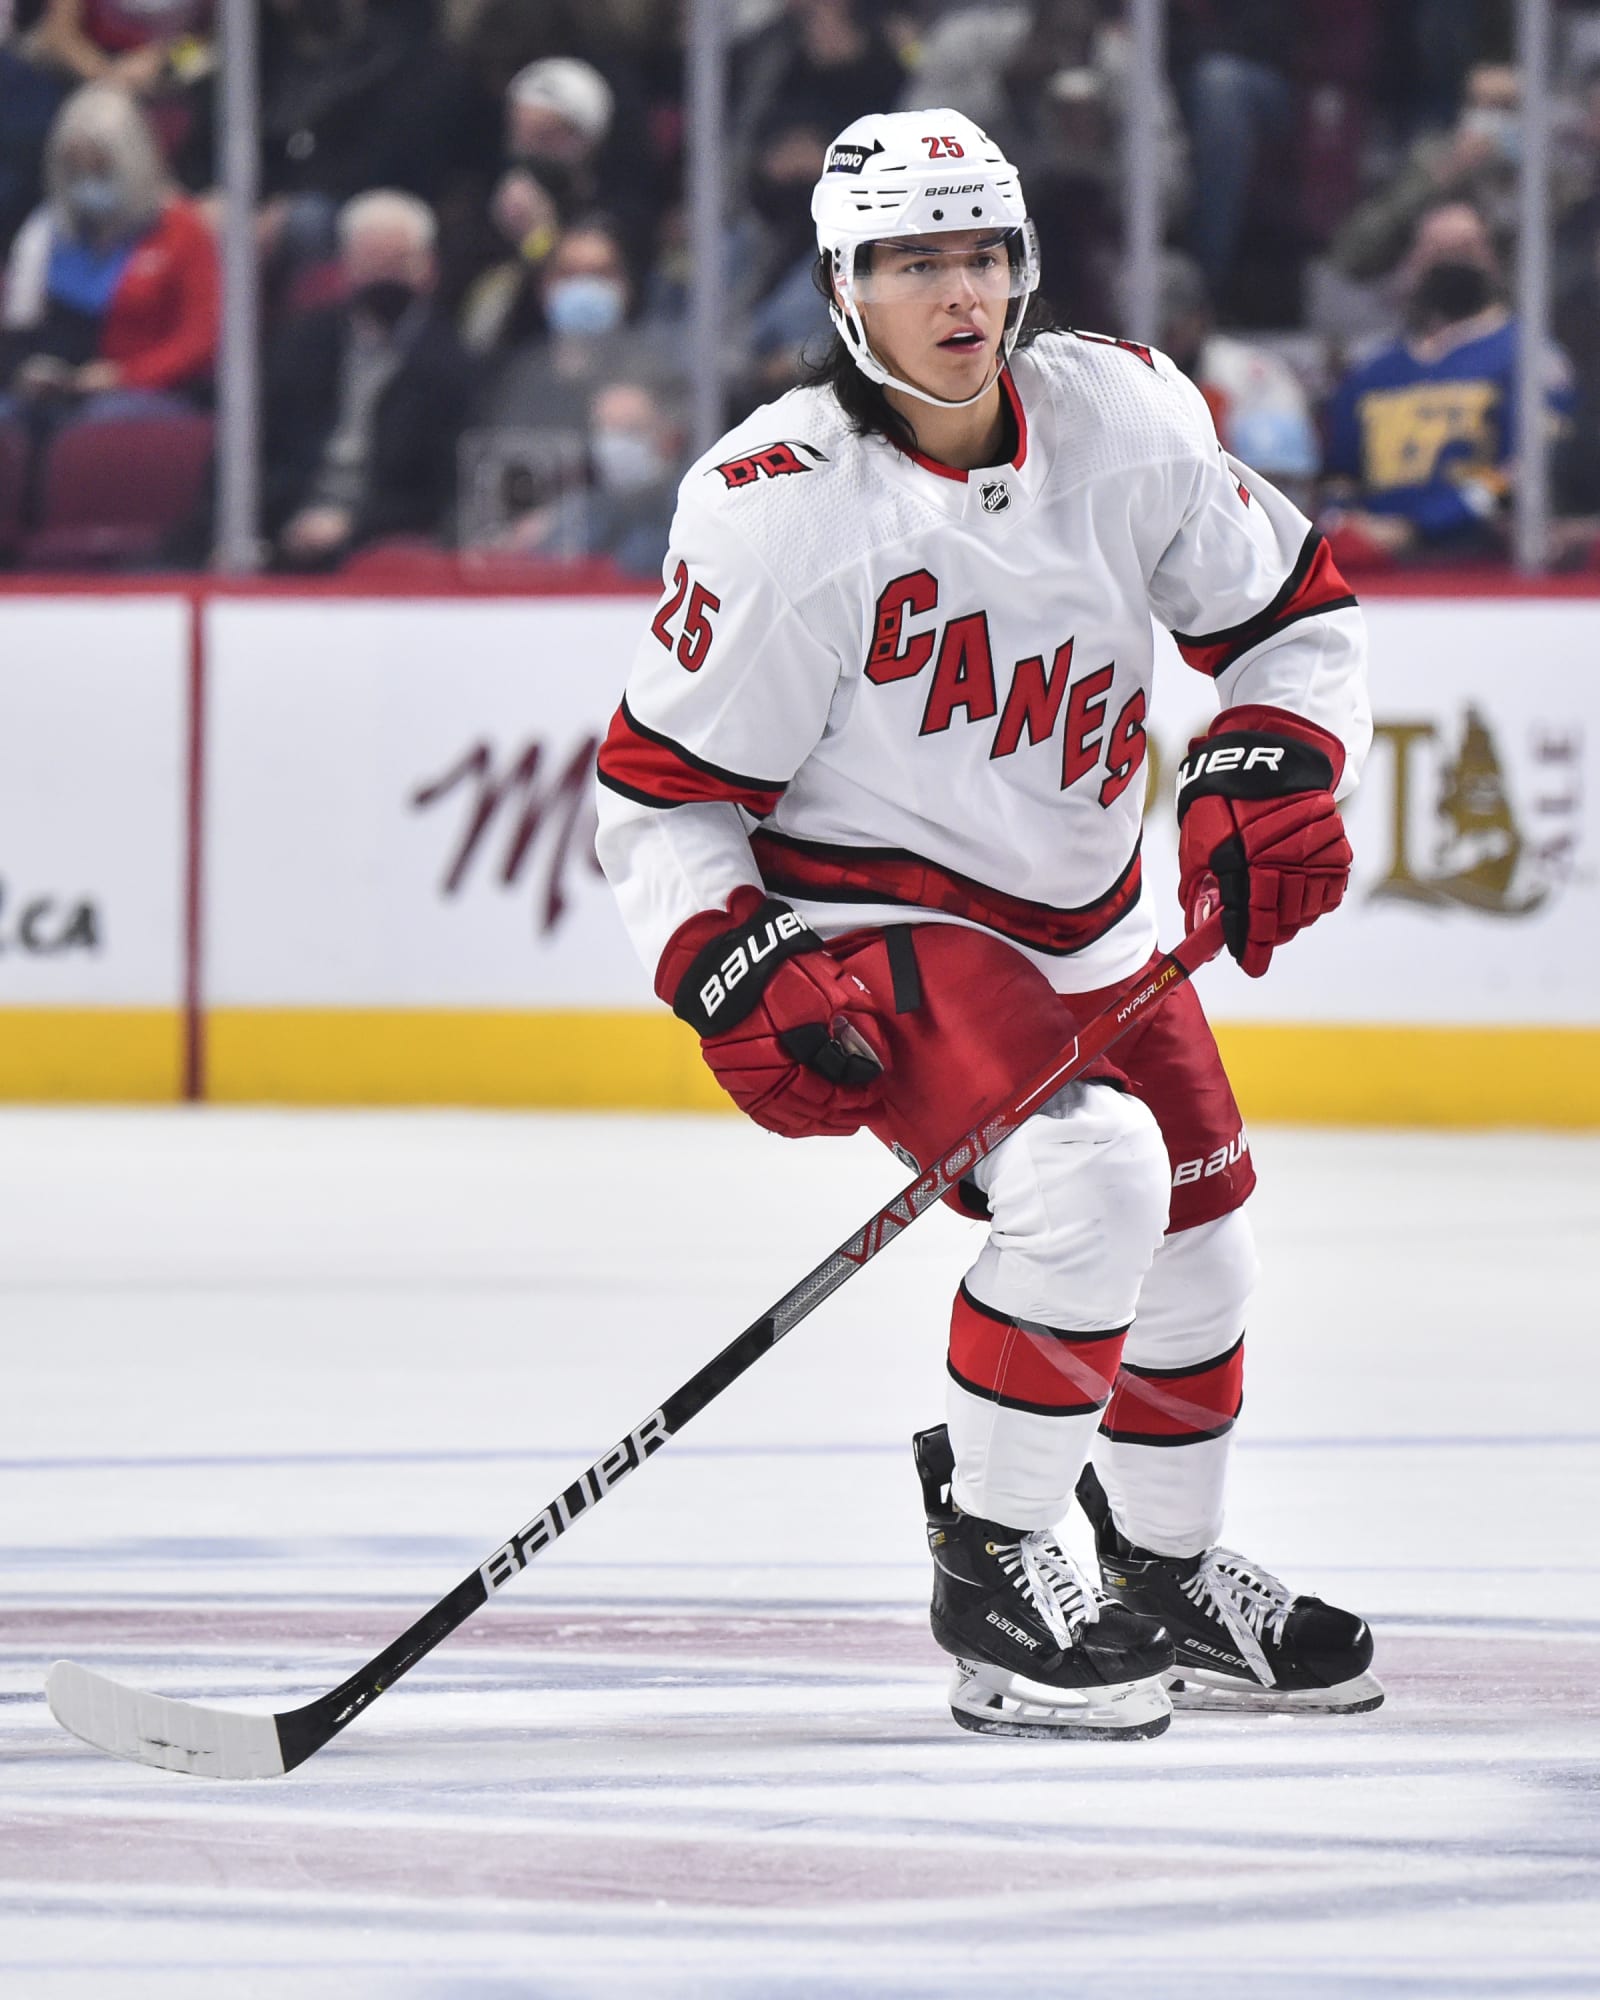 Hurricanes re-sign Ethan Bear for 1 year at $2.2 million for the season